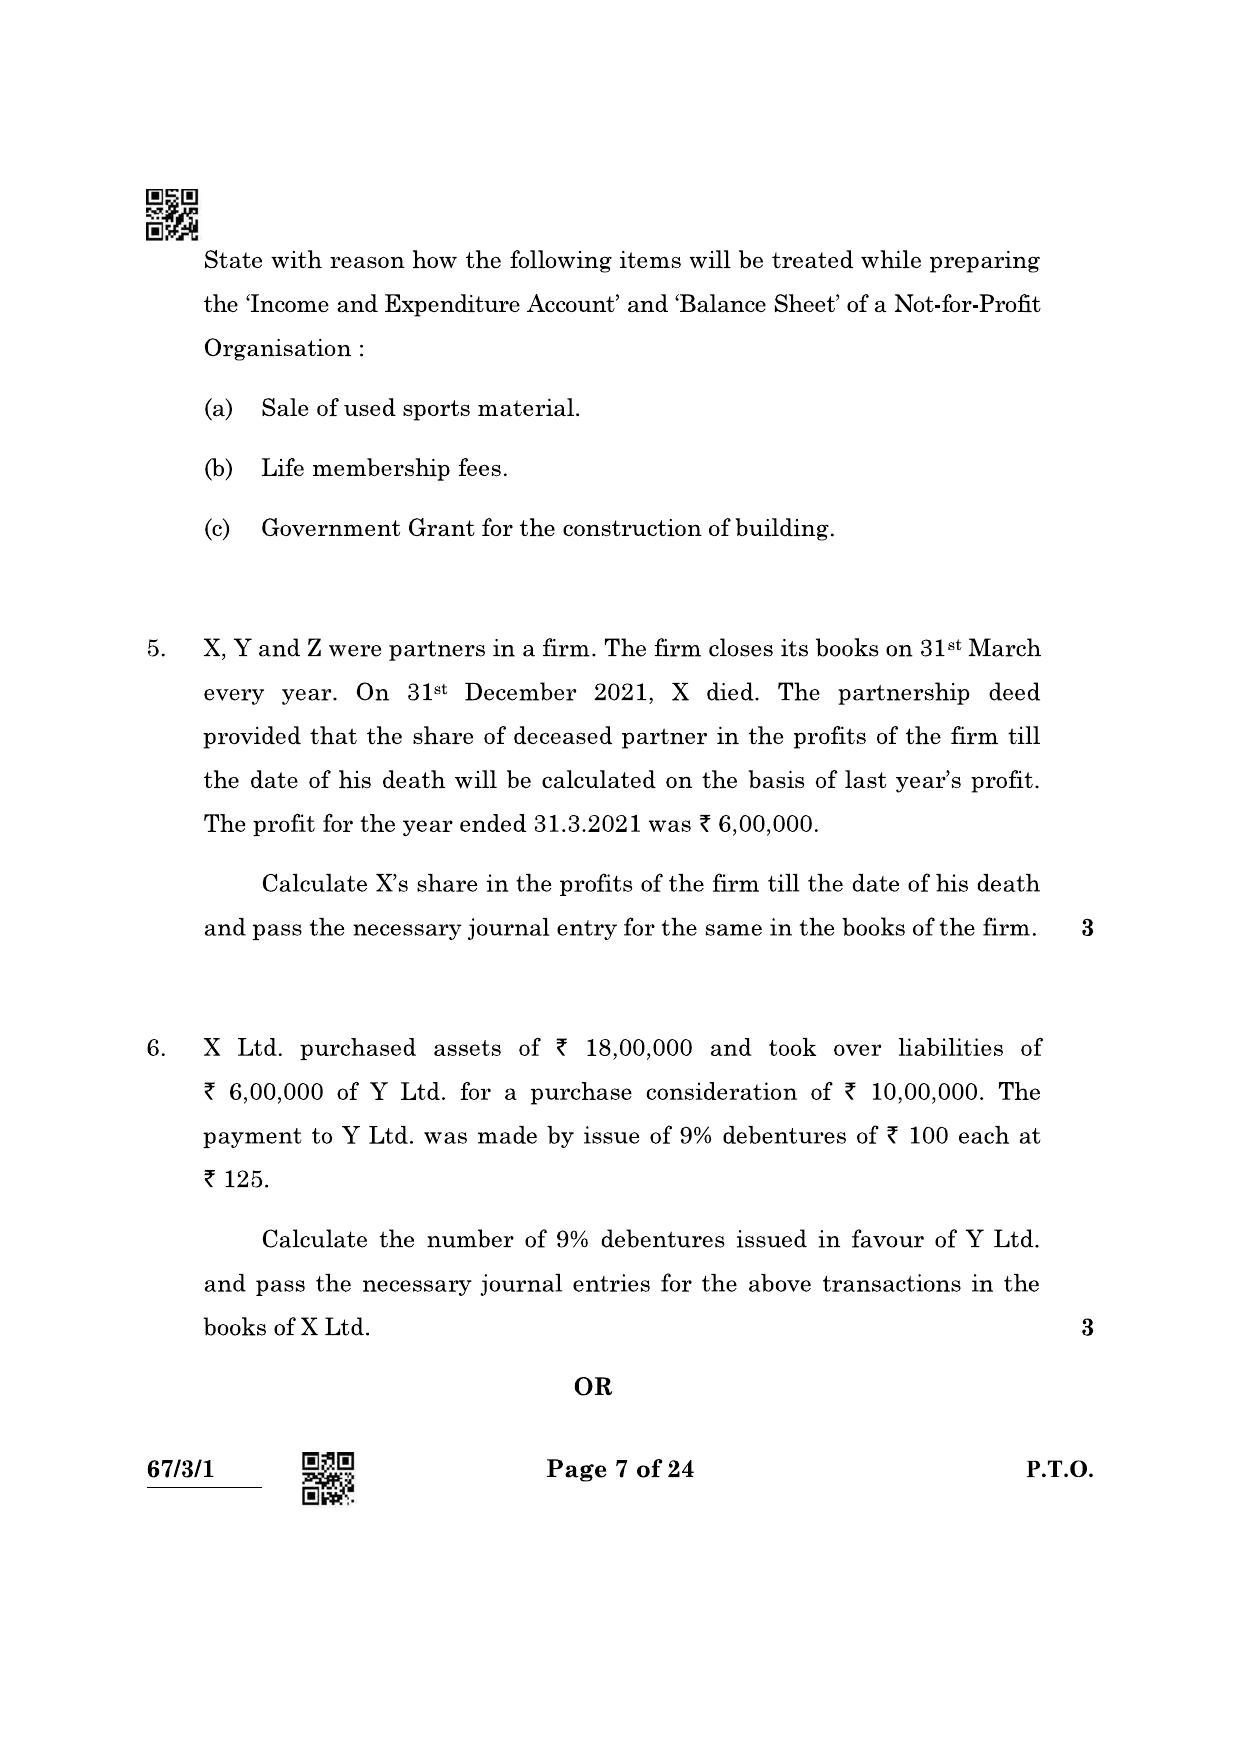 CBSE Class 12 67-3-1 Accountancy 2022 Question Paper - Page 7